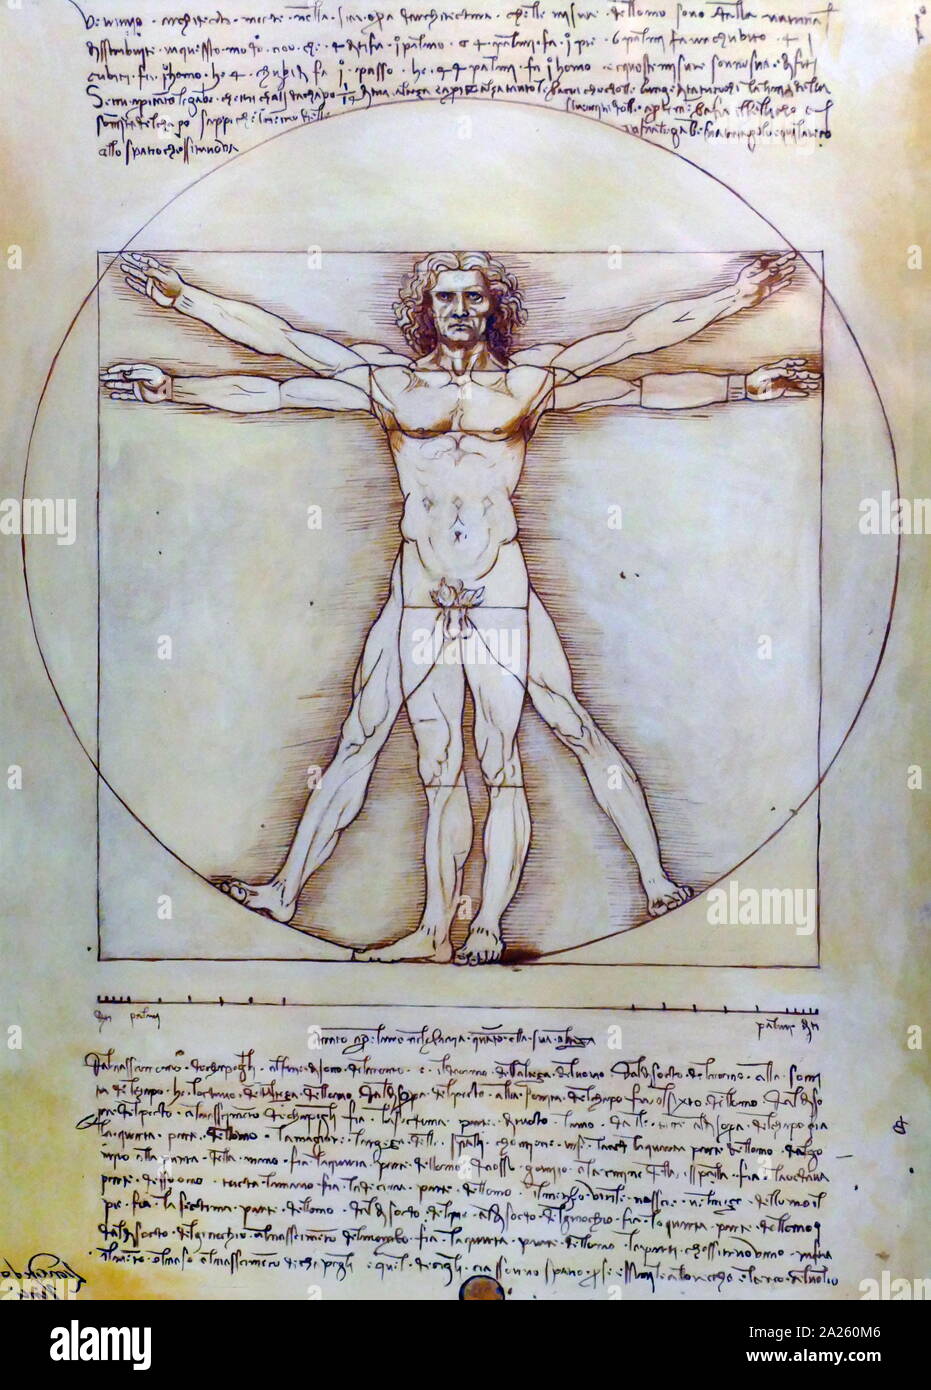 The Vitruvian Man (Le proporzioni del corpo umano secondo Vitruvio), a drawing by the Italian polymath Leonardo da Vinci around 1490. The drawing is based on the correlations of ideal human body proportions with geometry described by the ancient Roman architect Vitruvius in Book III of his treatise De architectura. Leonardo da Vinci (April 1452 - May 1519), an Italian polymath of the Renaissance. Stock Photo